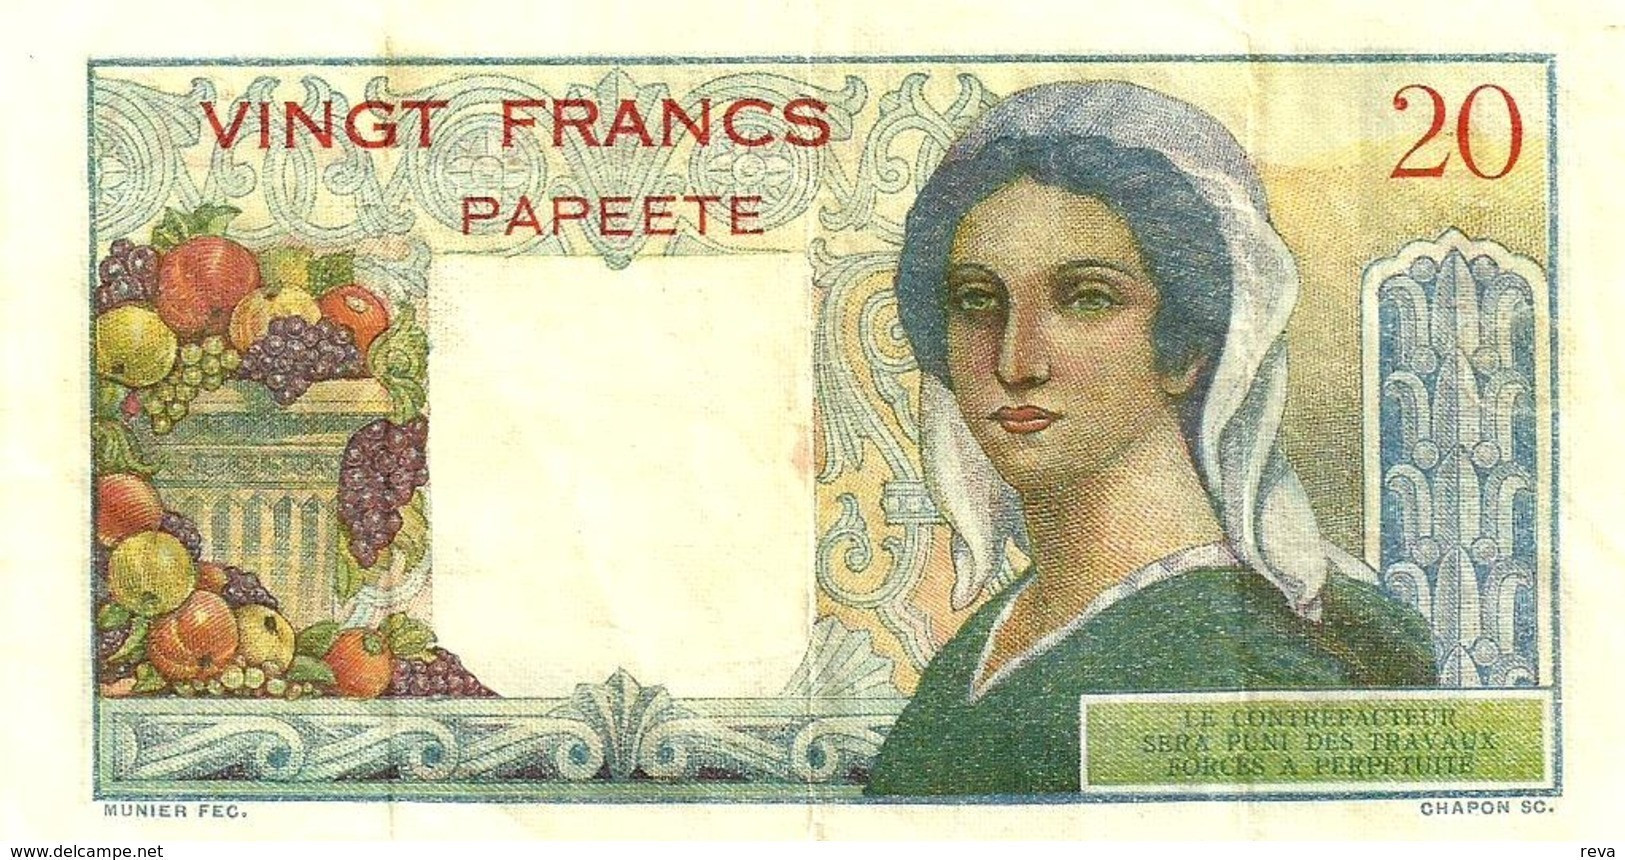 FRENCH POLYNESIA 20 FRANCS GREY MAN HEAD FRONT WOMAN BACK NOT DATED(1963) P21c 3RD SIG VARIETY F+ READ DESCRIPTION!! - Papeete (French Polynesia 1914-1985)